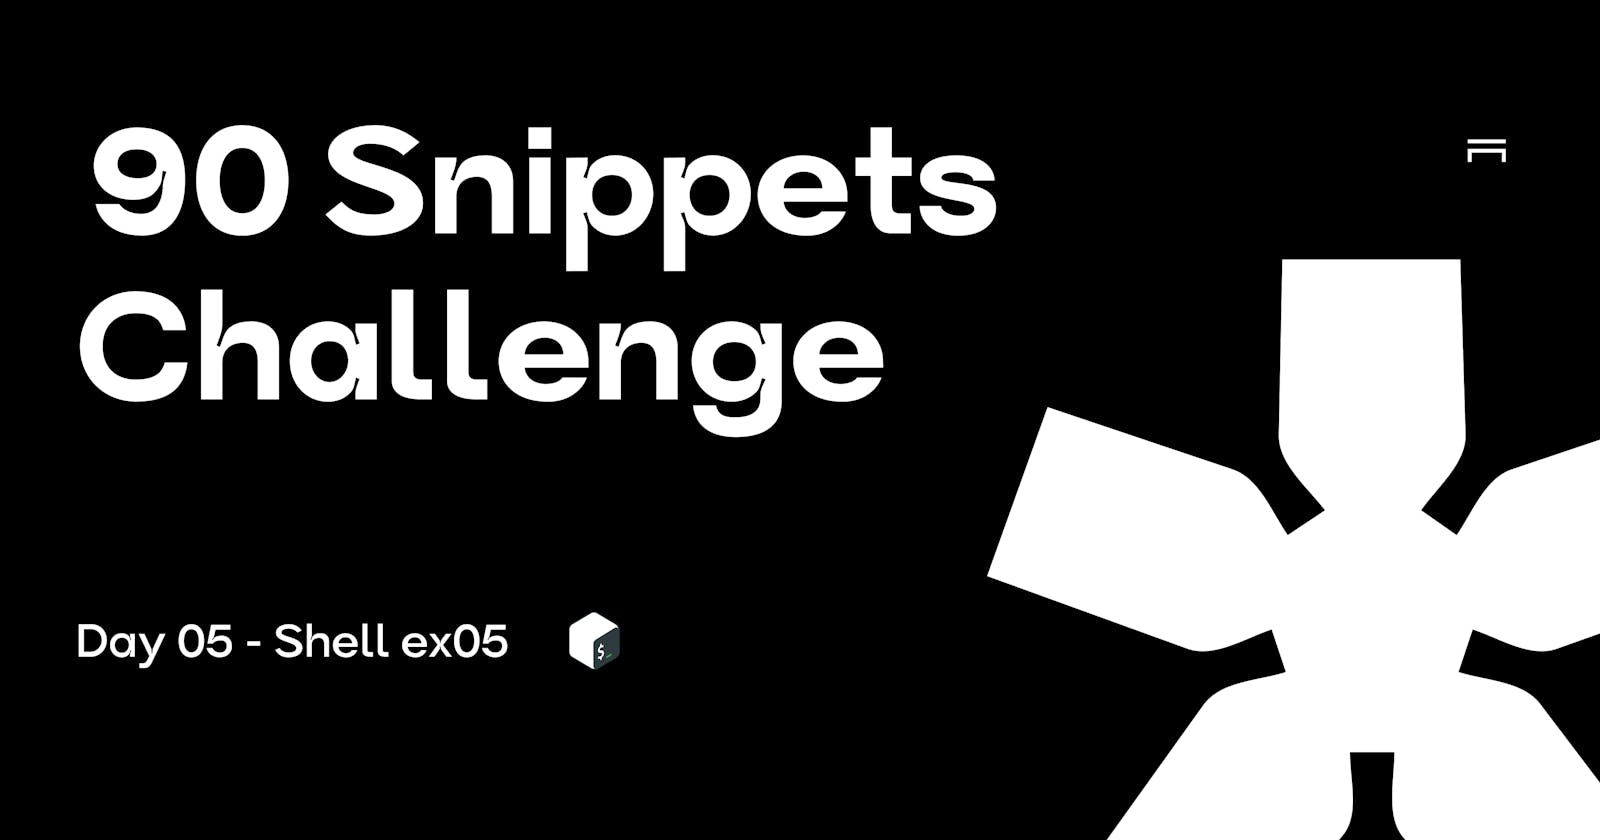 90 Snippets: Still writing in shell 🧙‍♂️